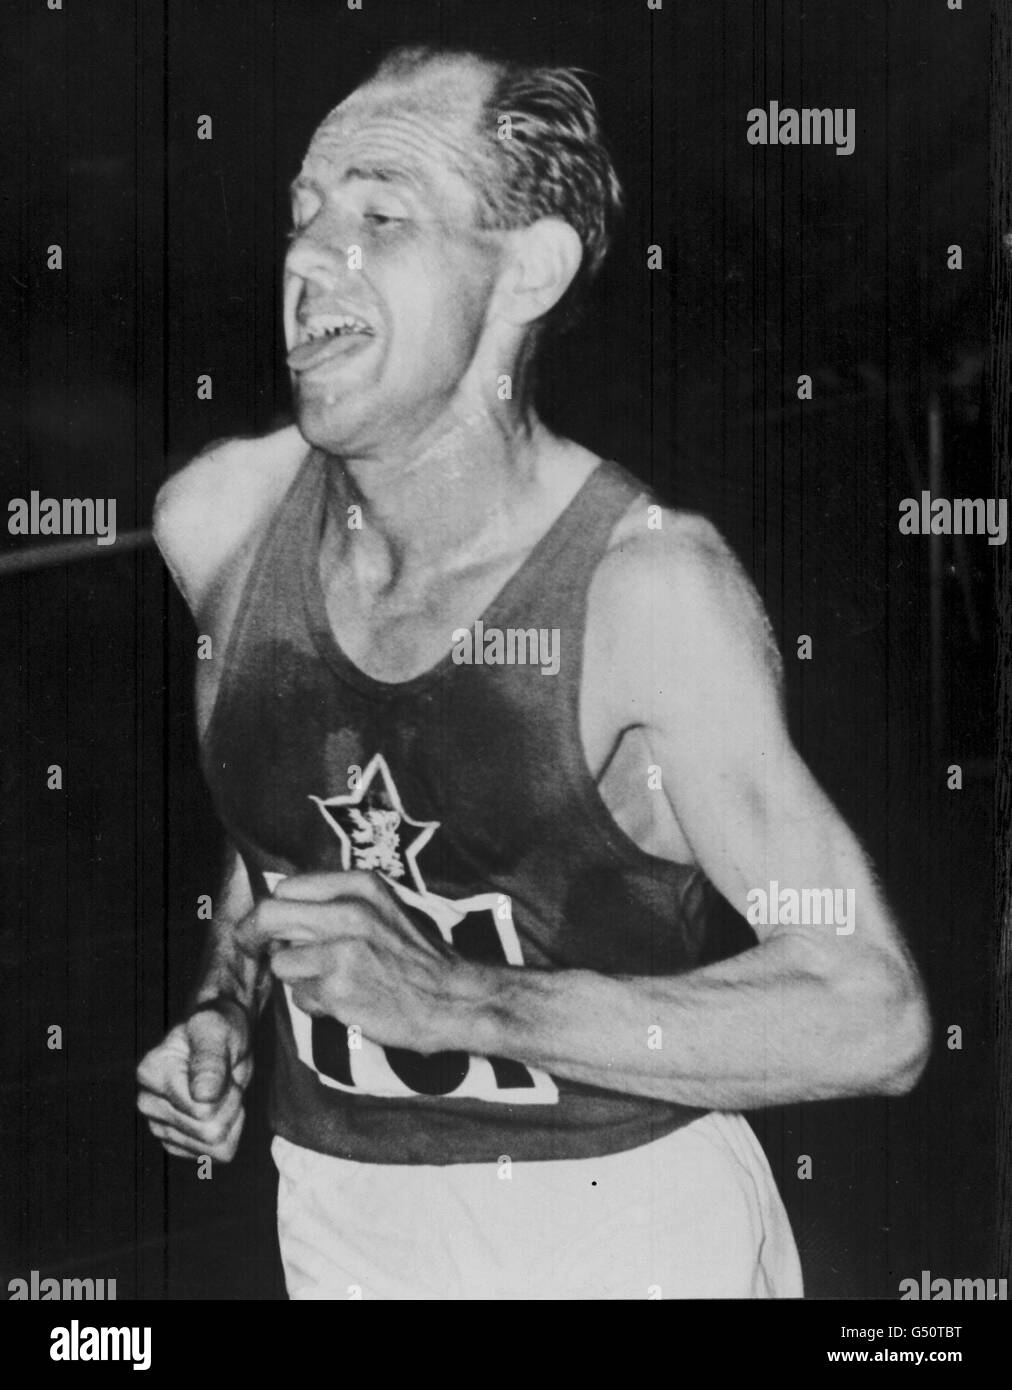 Czech athlete Emil Zatopek winning the 10,000 metres in the European Championships in Berne, Switzerland 1954. 22/11/00: Zatopek has died. He died in a military hospital in Prague in the Czech Republic, aged 78, after a long illness. * Zatopek became four-times Olympic champion between 1948 and 1952 and set 18 world records. Stock Photo